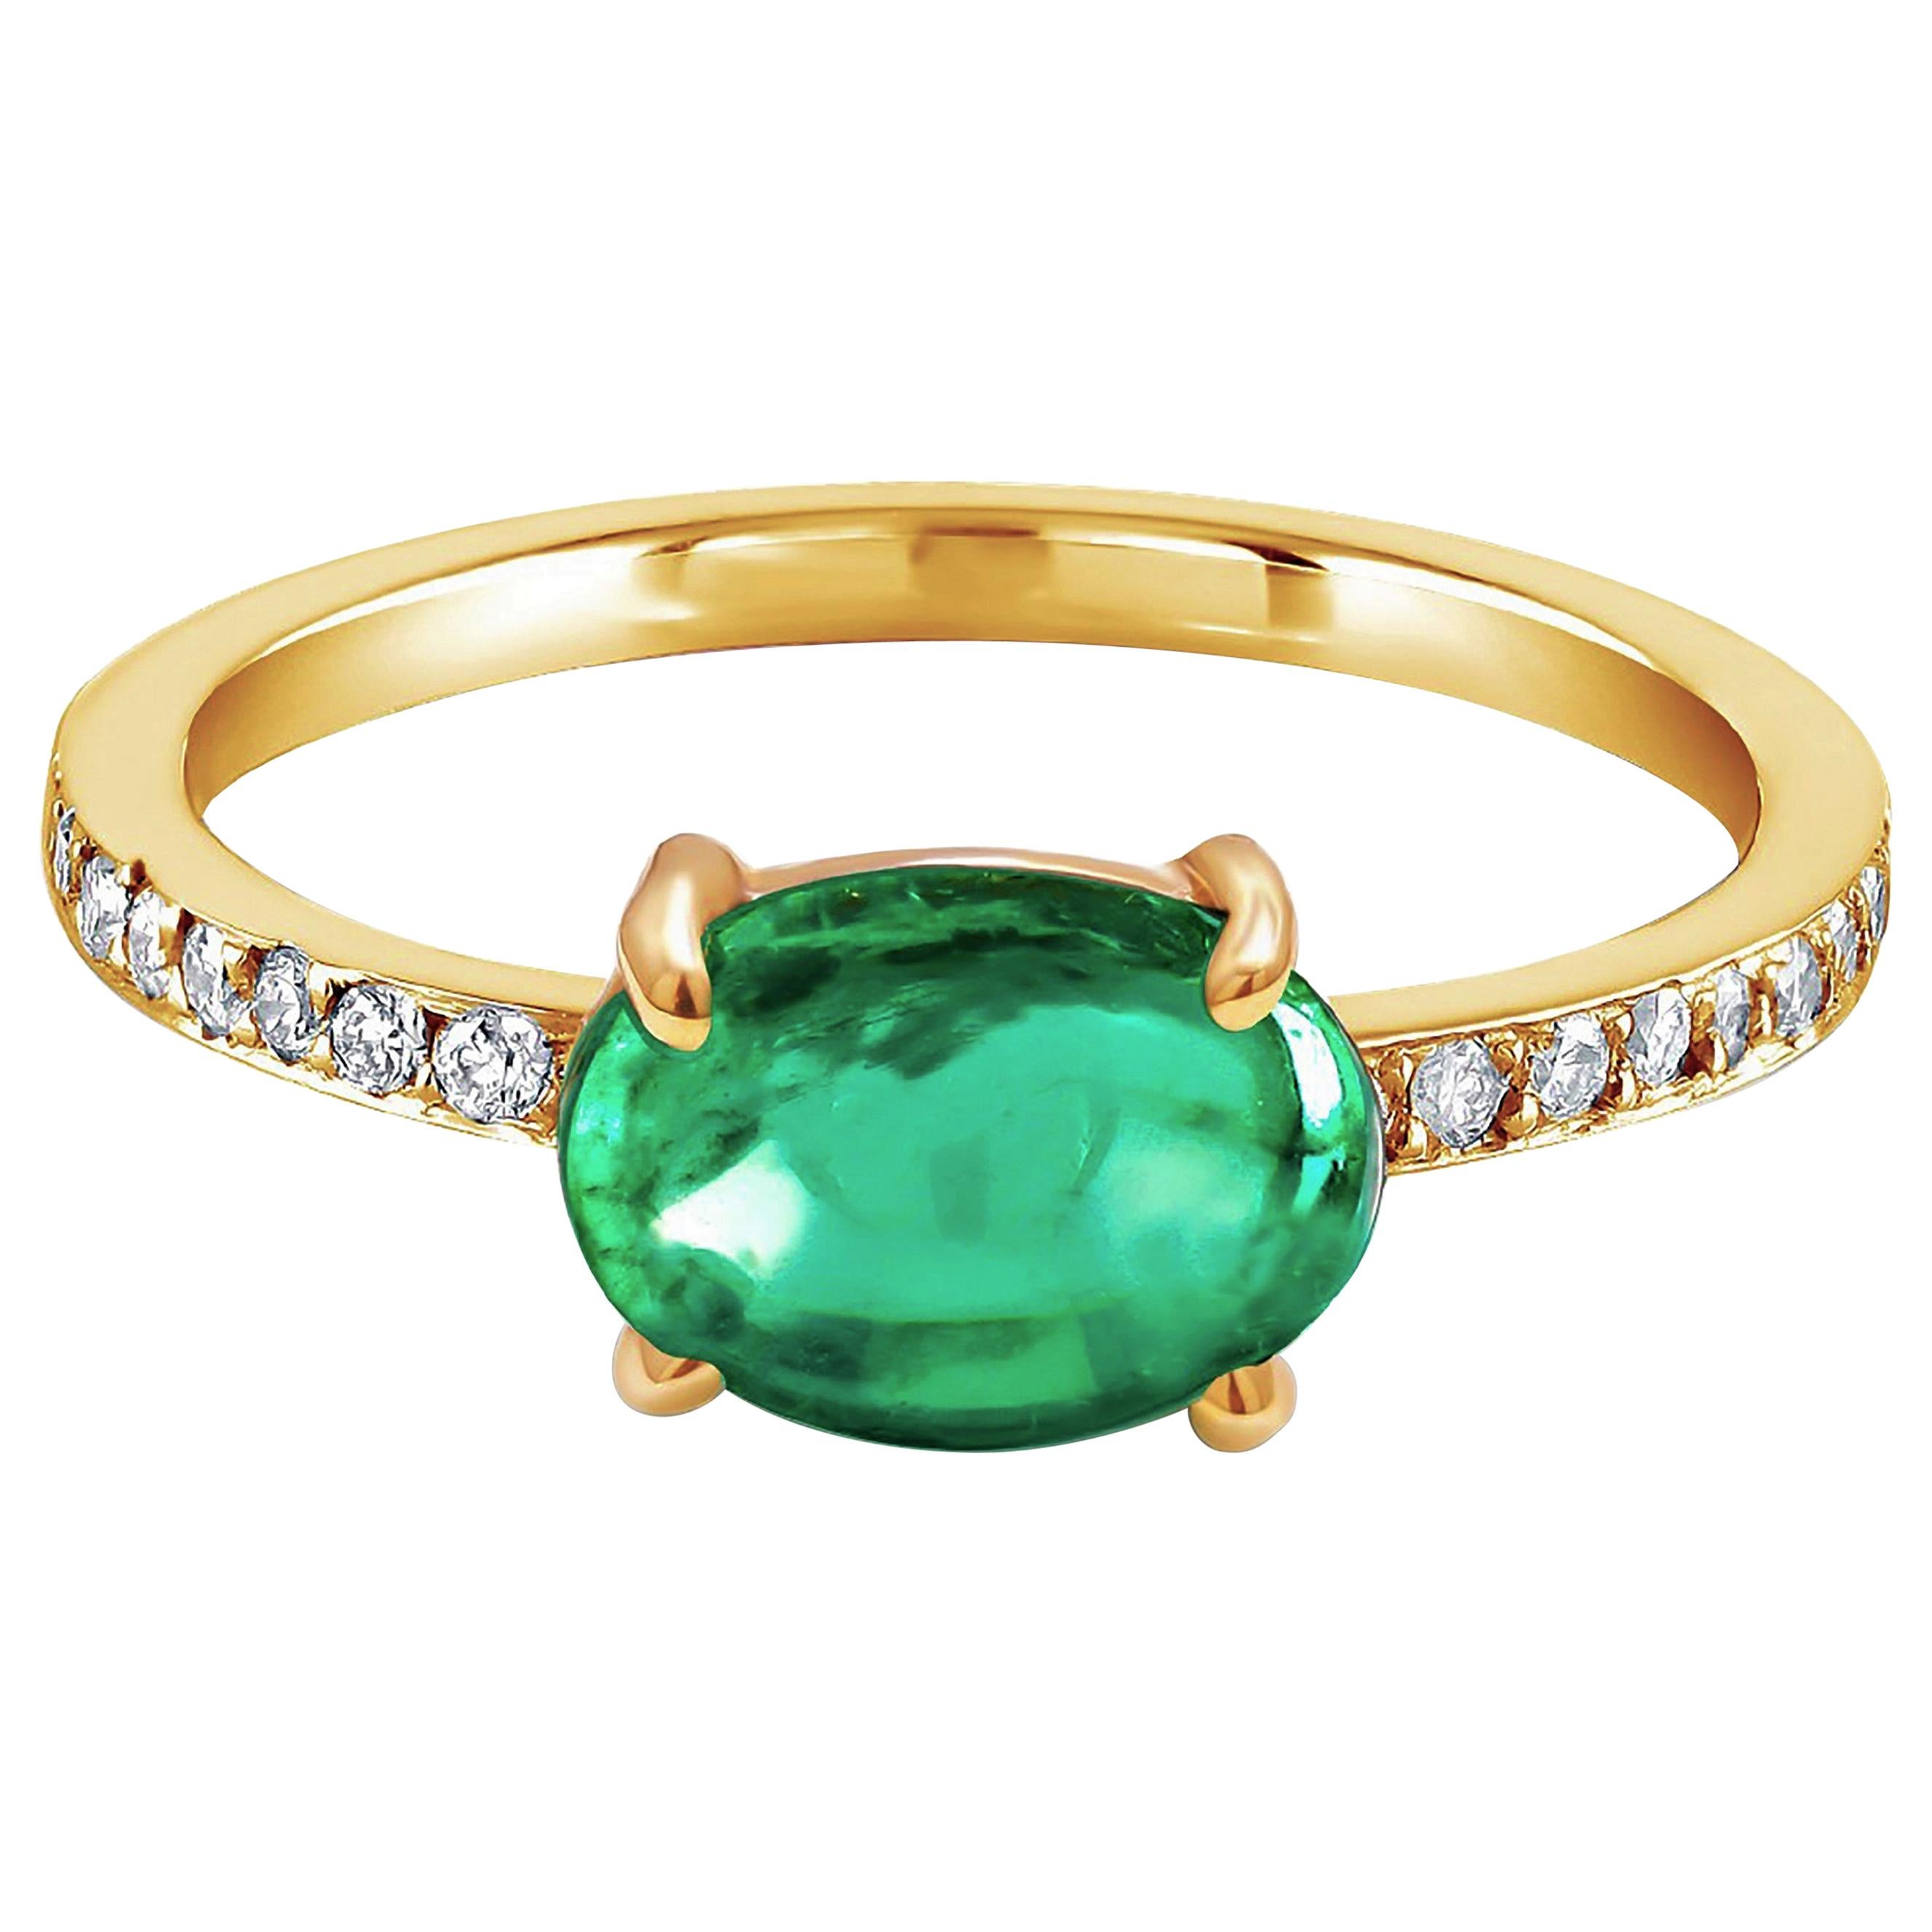 Cabochon Emerald and Diamond Yellow Gold Cocktail Ring Weighing 2.14 Carat